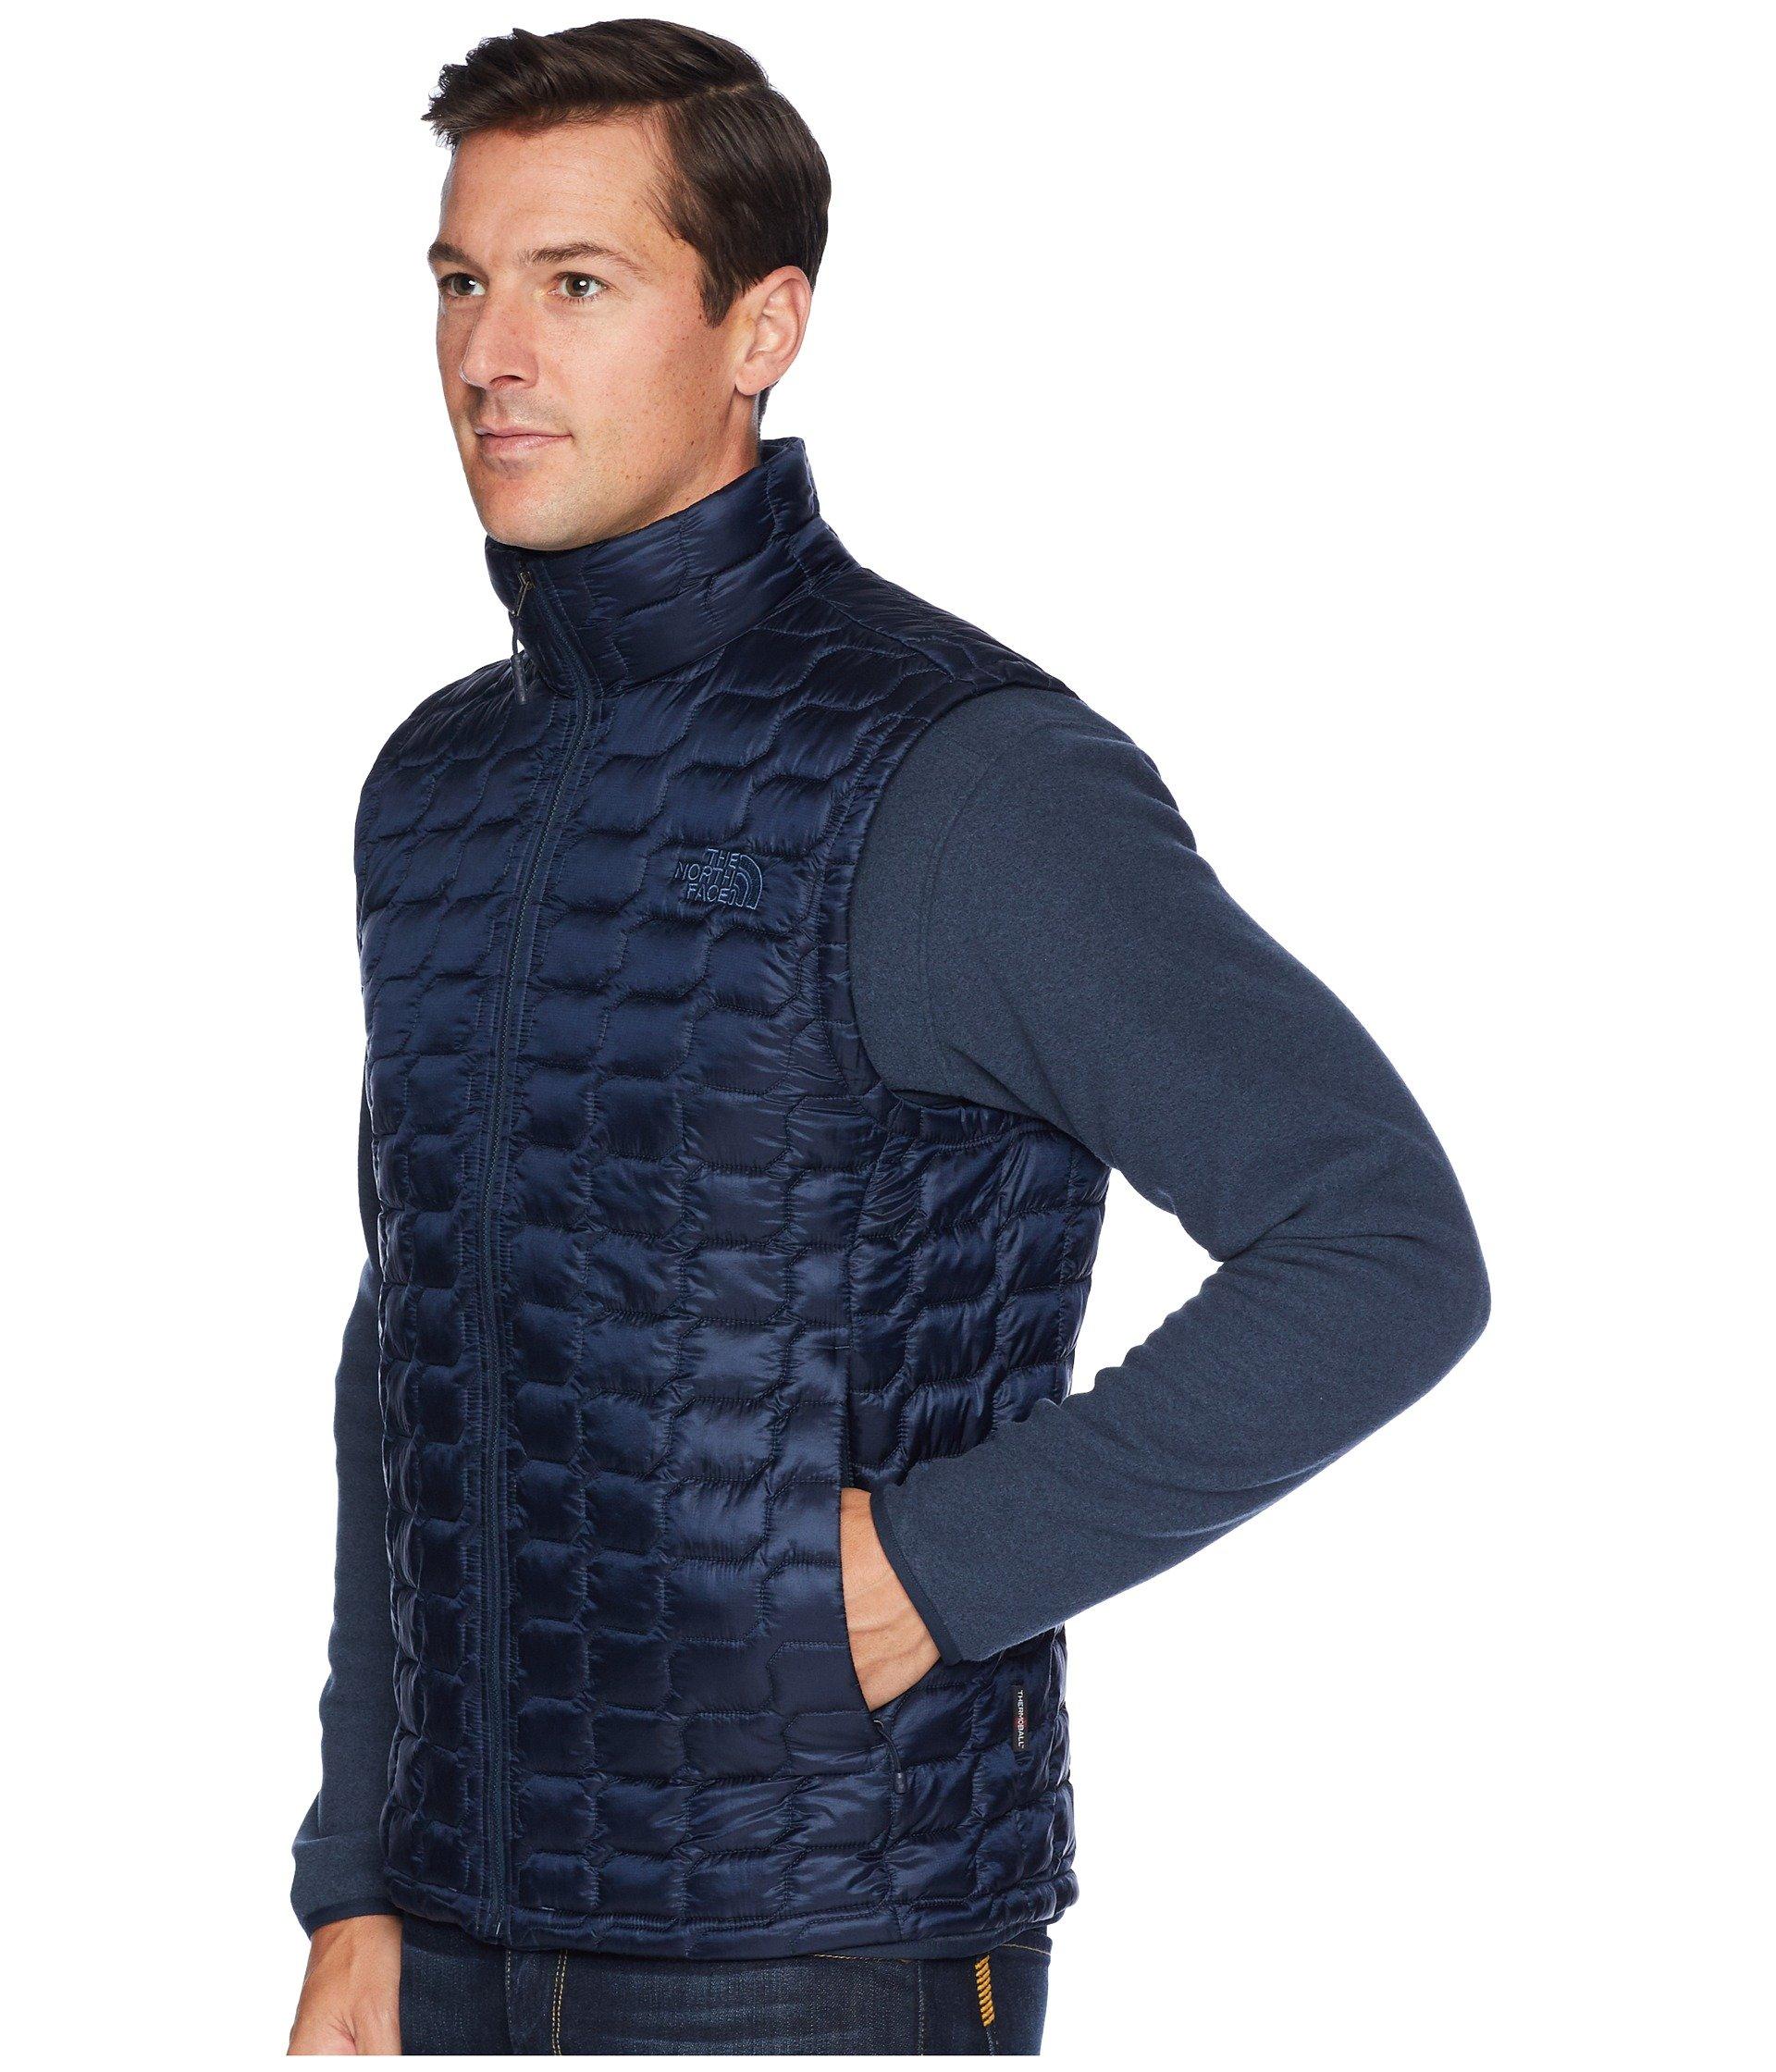 thermoball vest mens